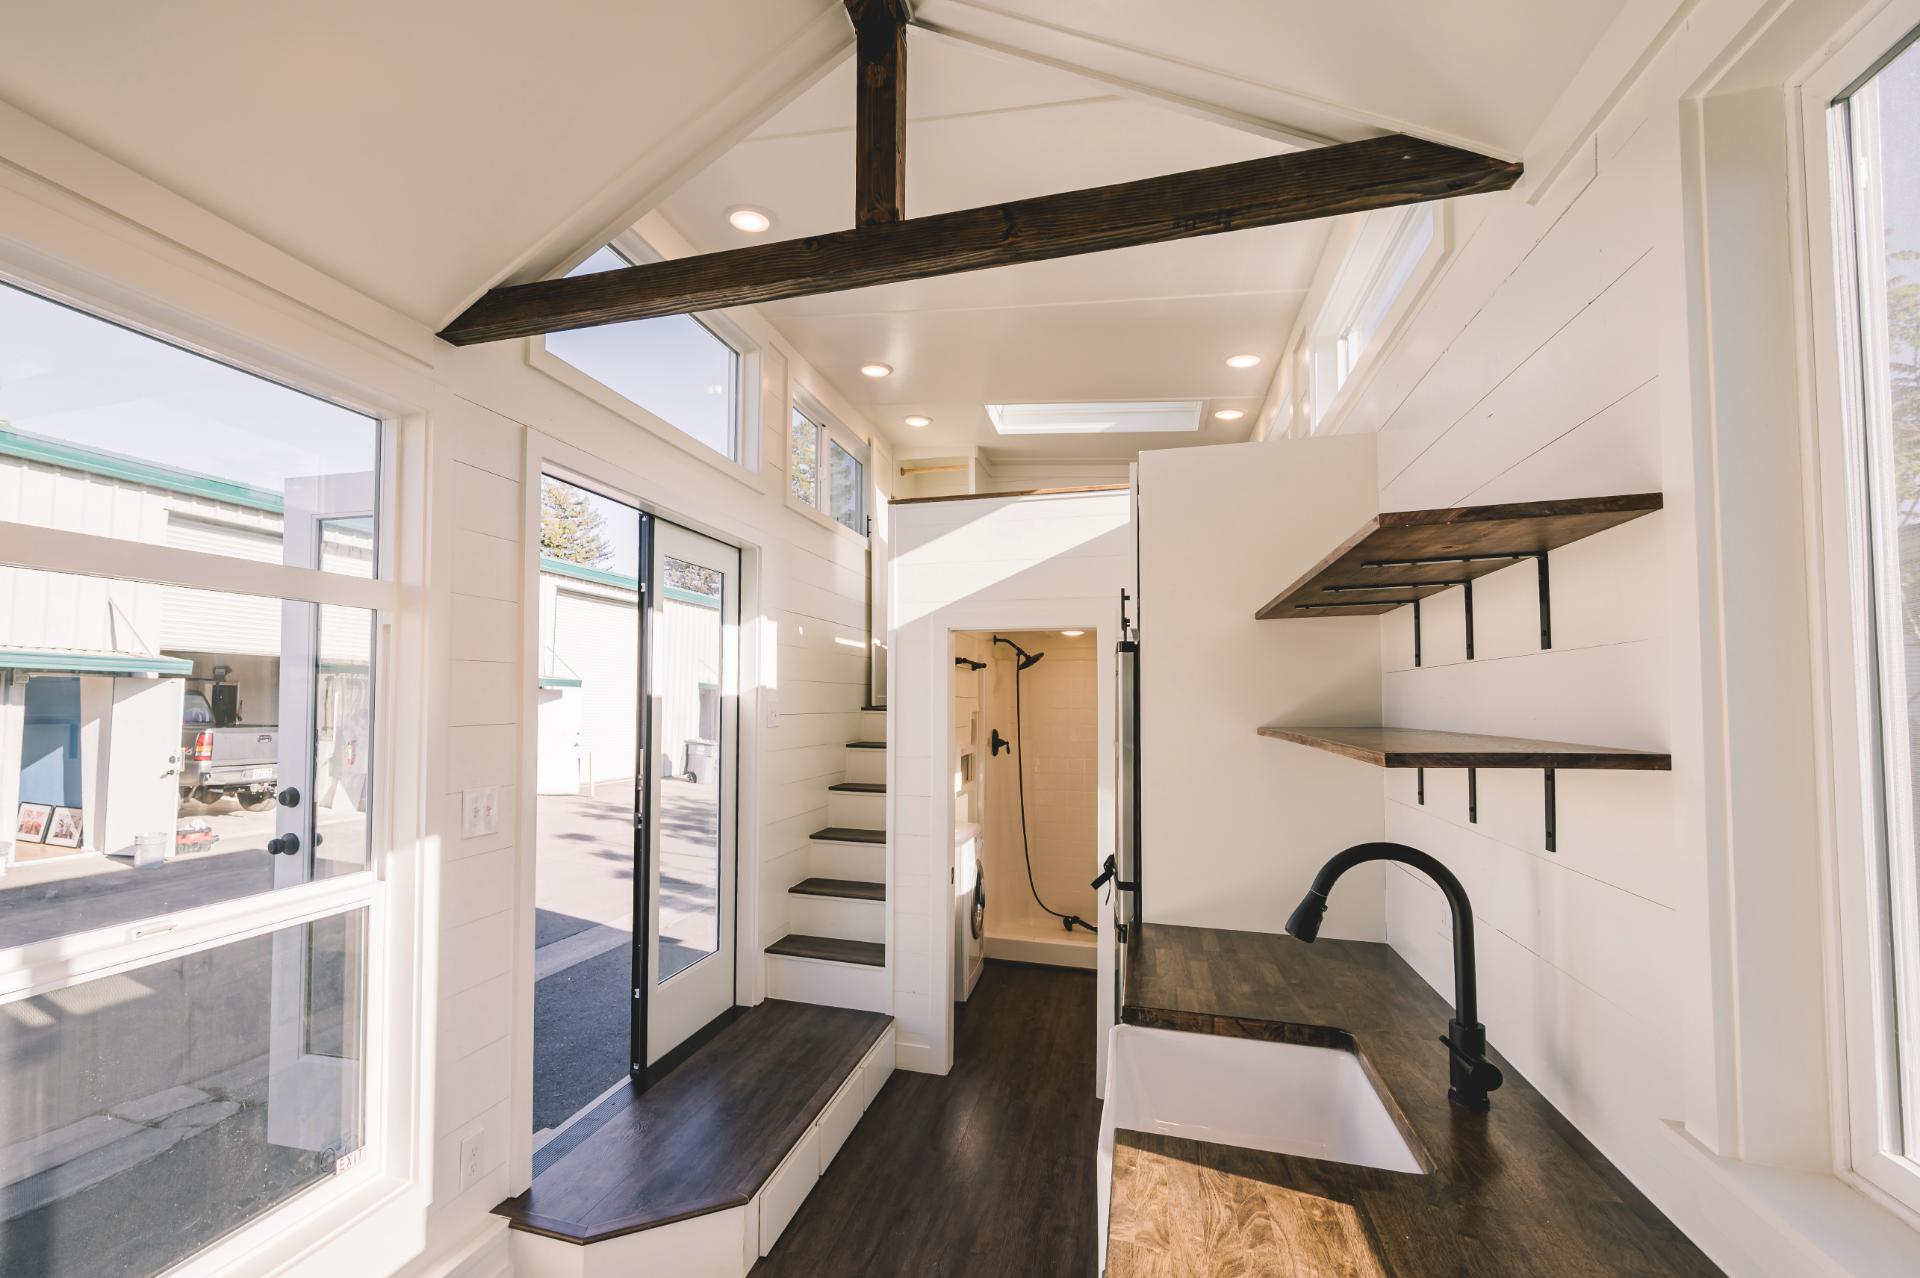 Large Windows for Lots of Natural Light - Gallery 30 by California Tiny House